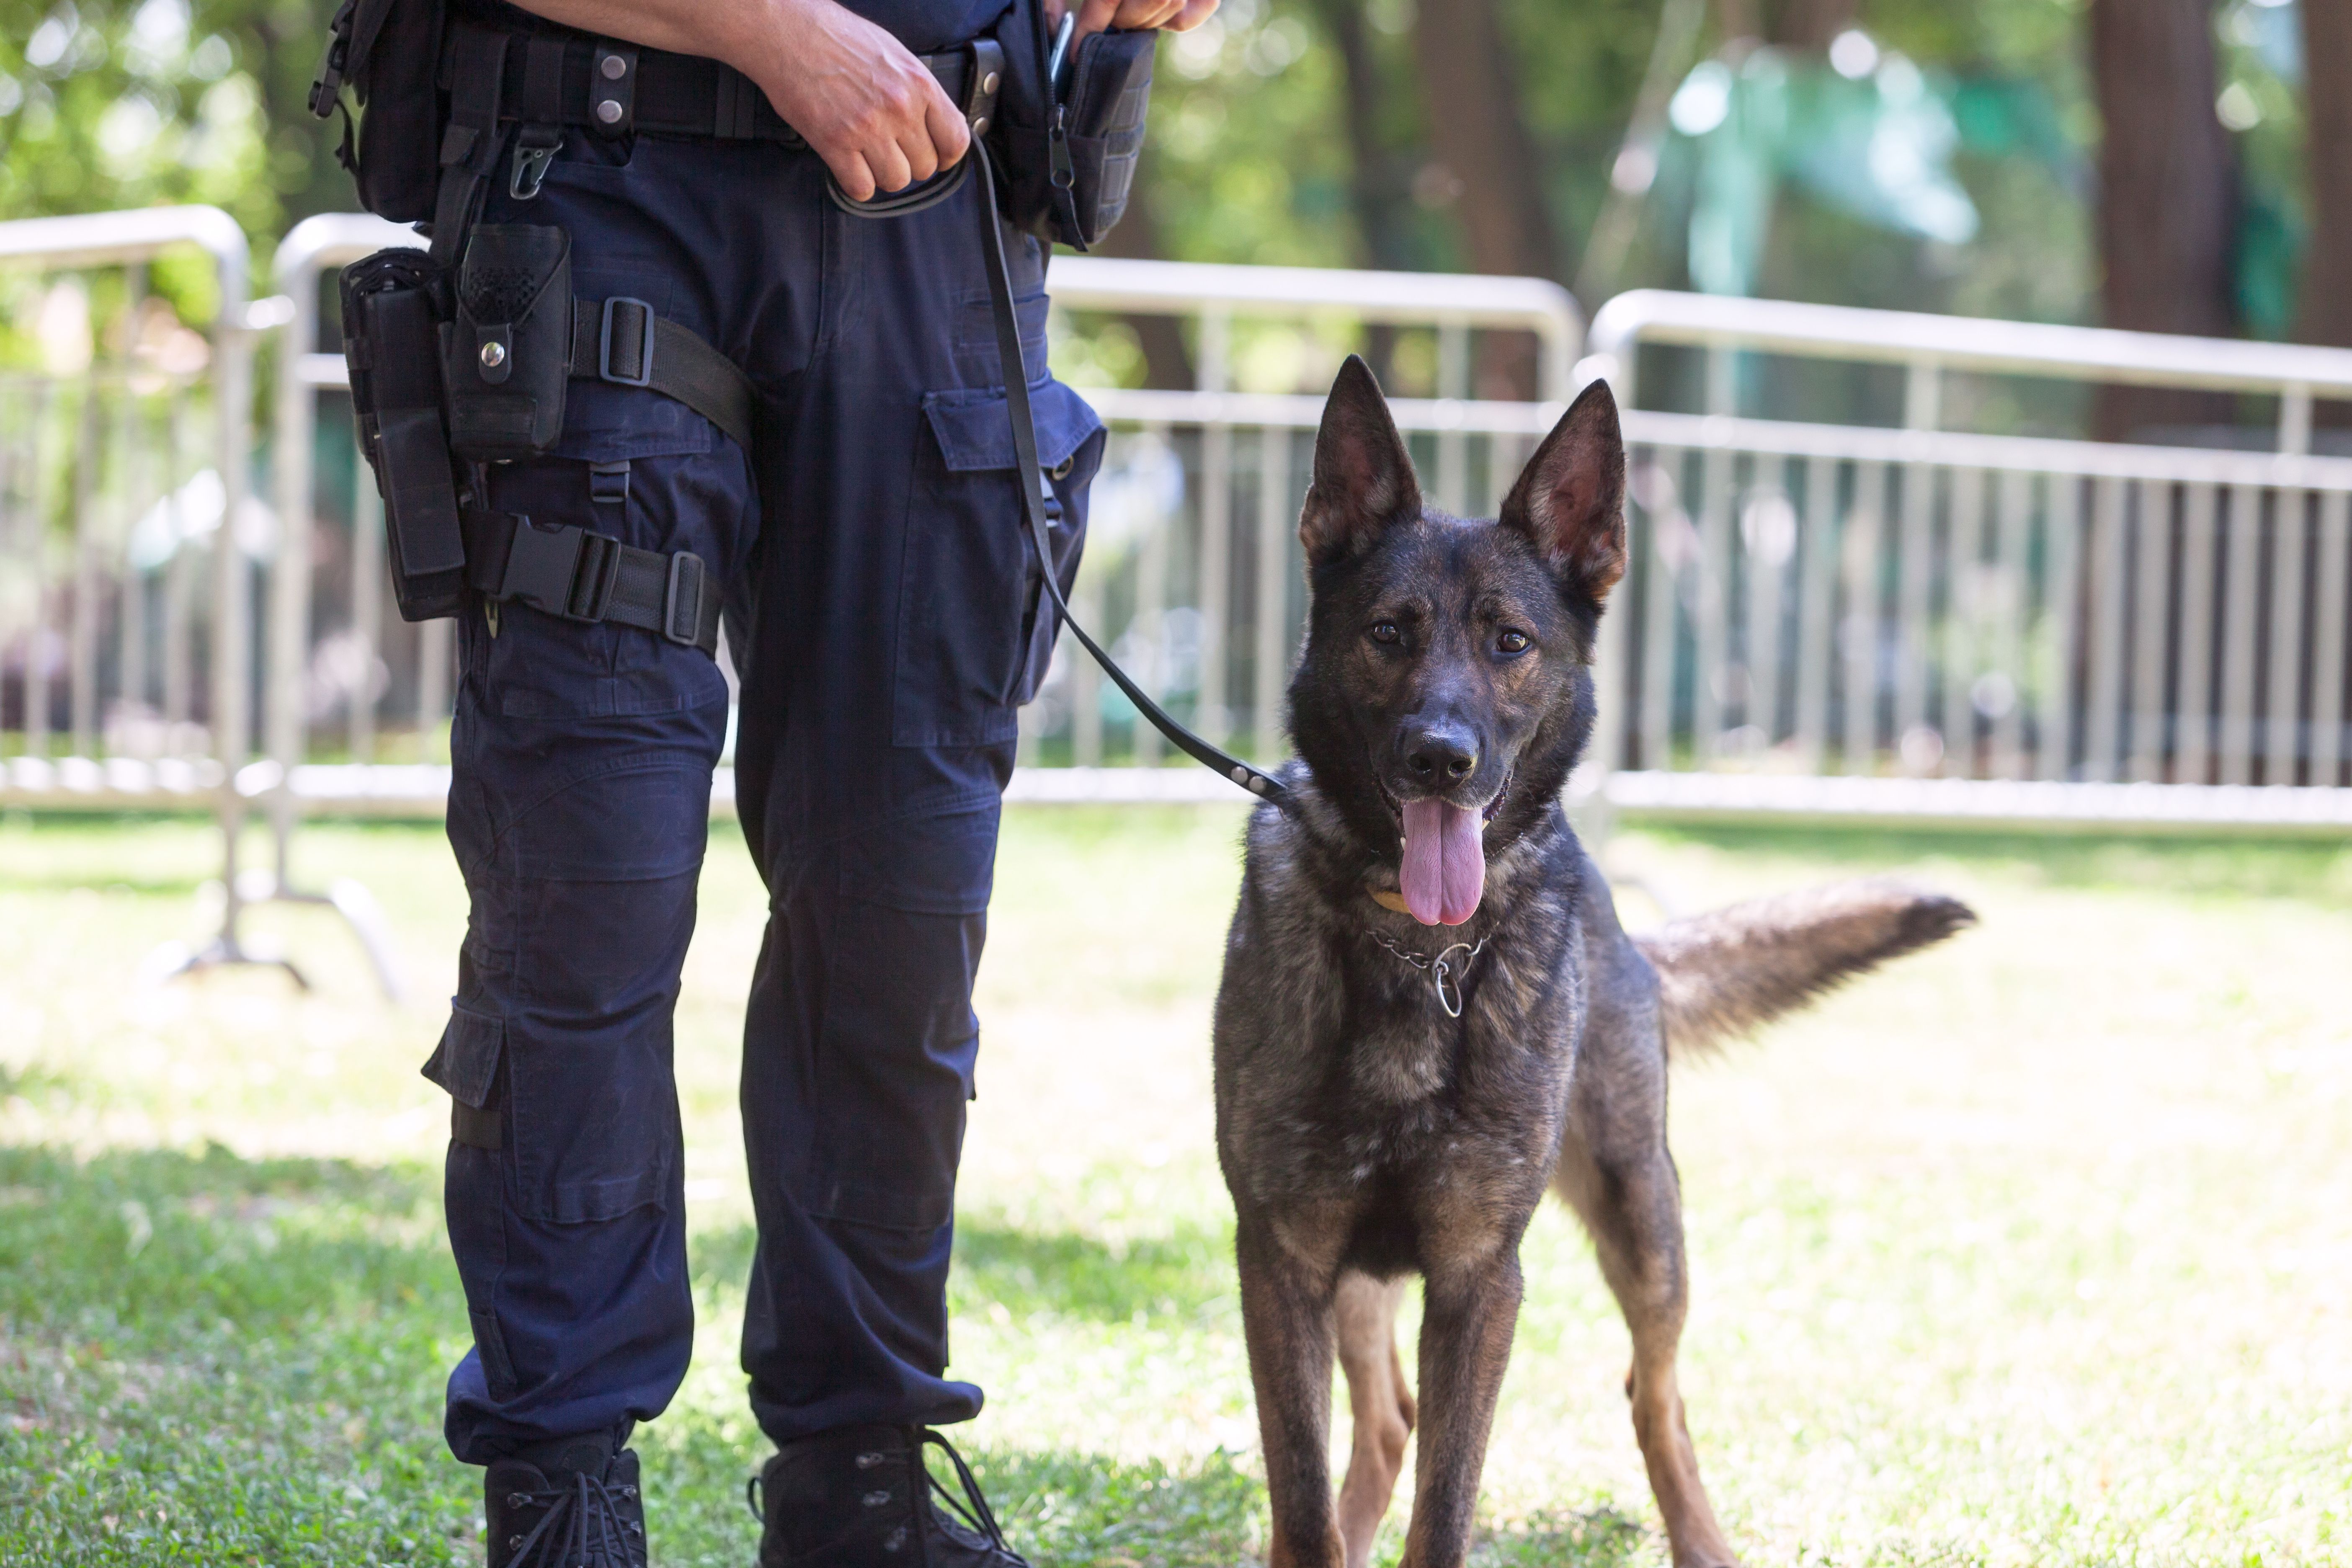 Toxin Tails honors drug detection dogs